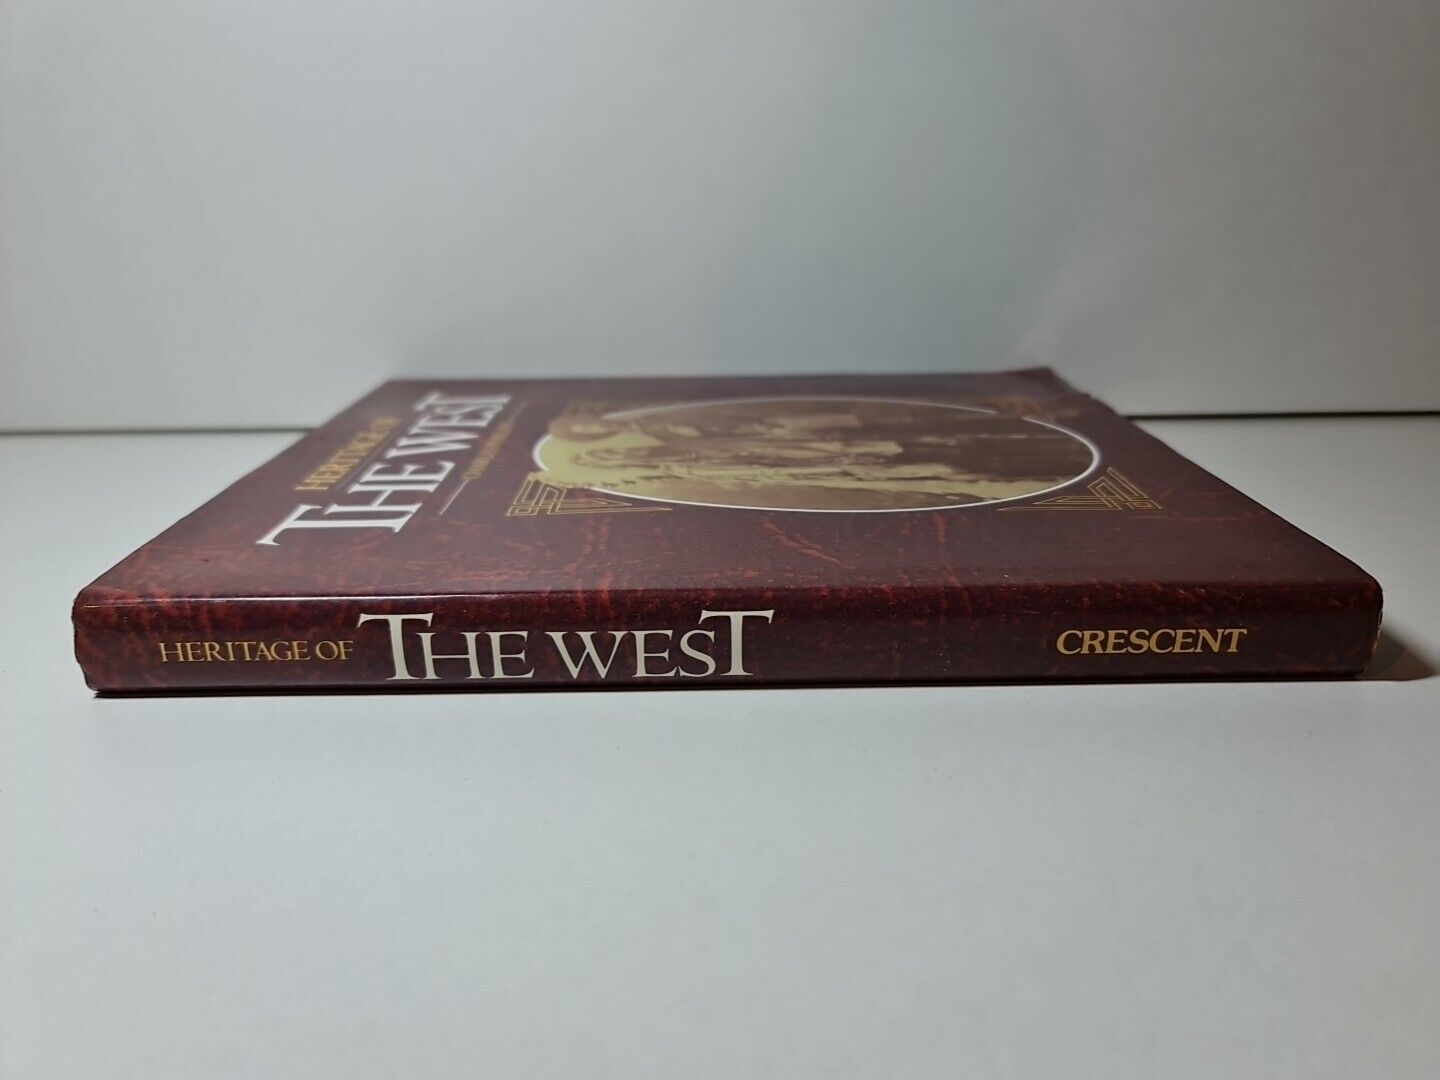 Heritage of the West by Charles Phillips (1992)